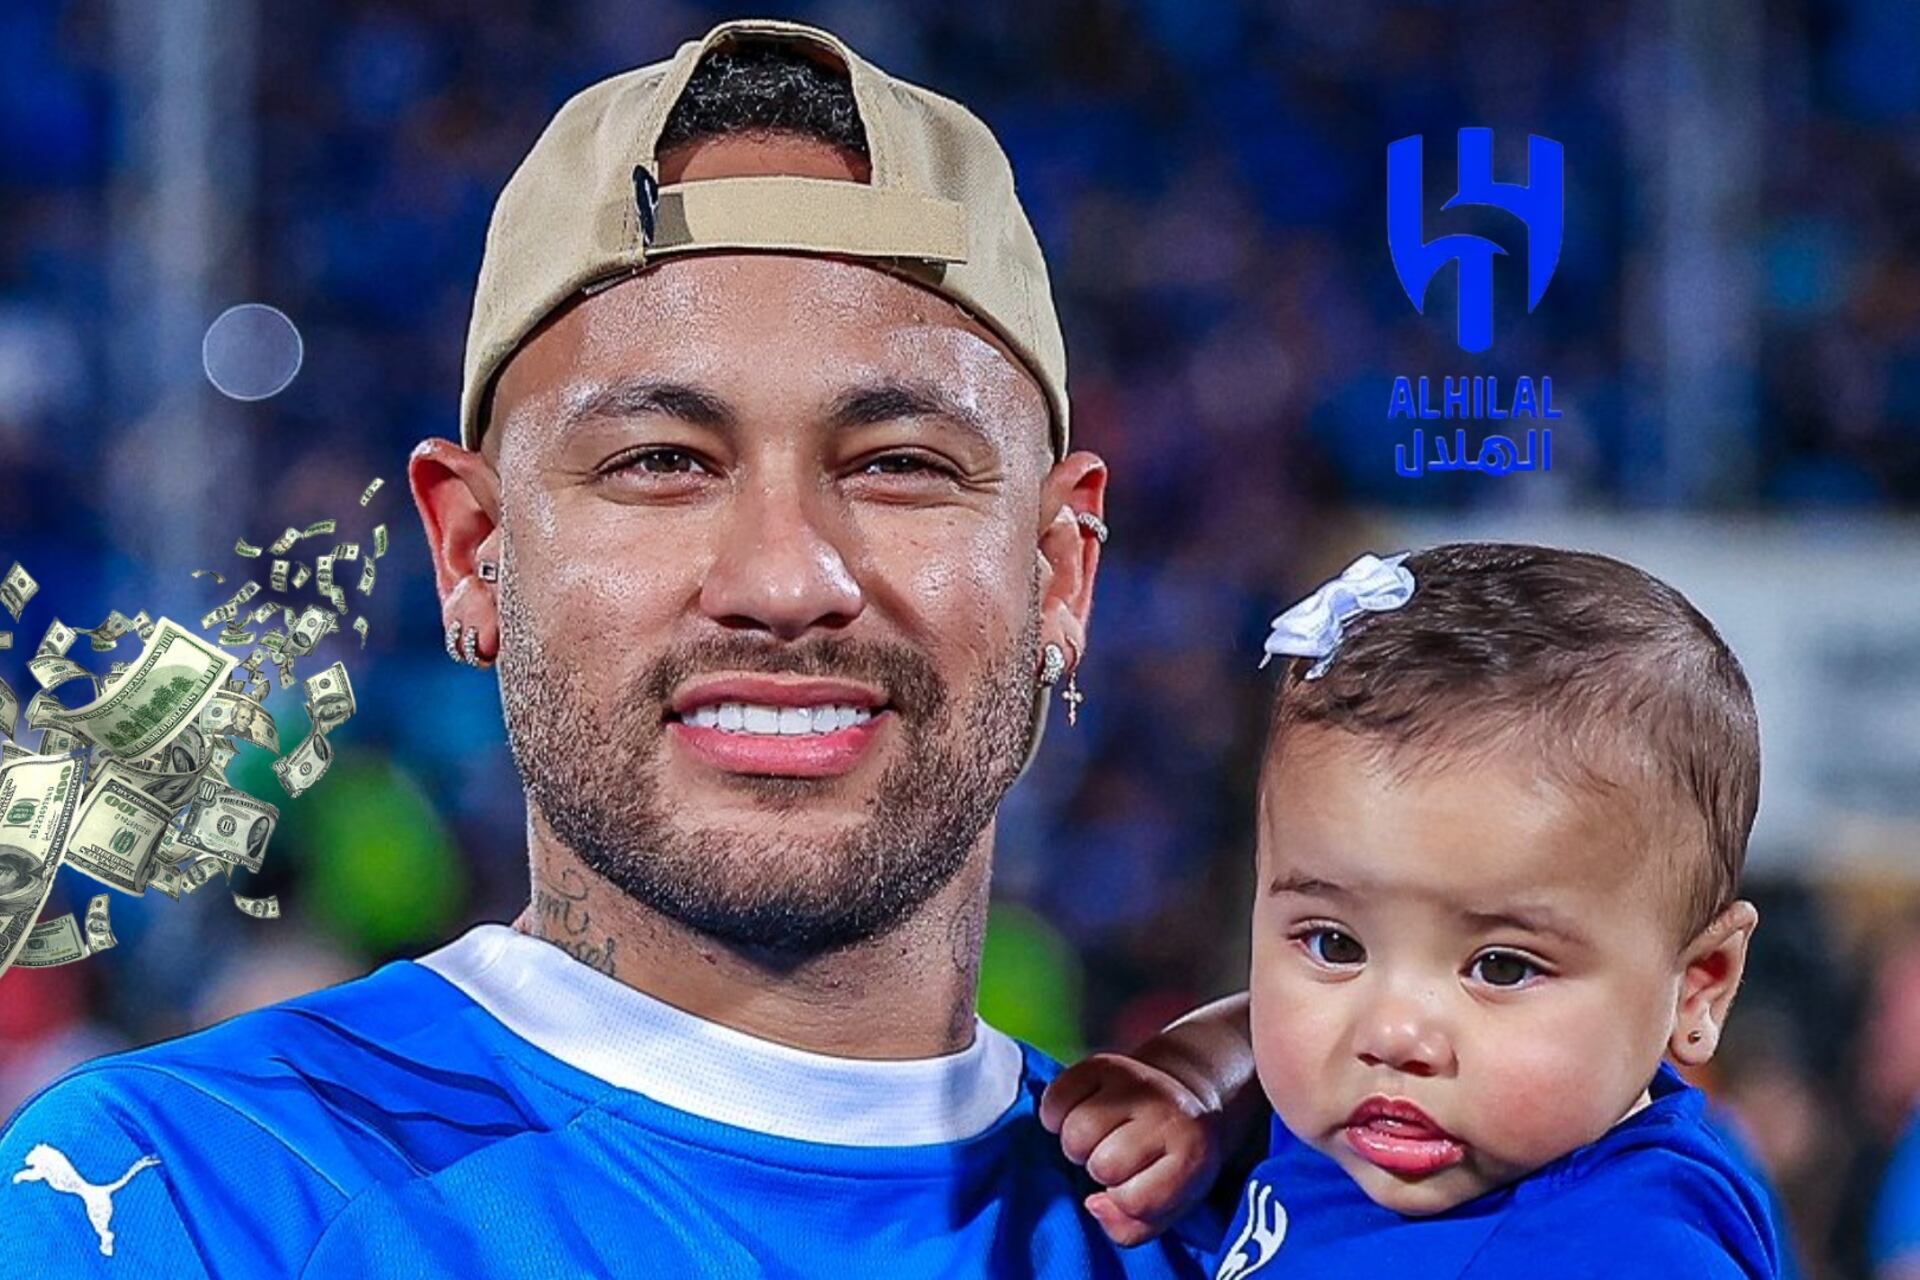 Fans keep talking about Neymar but outside of soccer, his cutest dad side and the millions he spends on his daughter